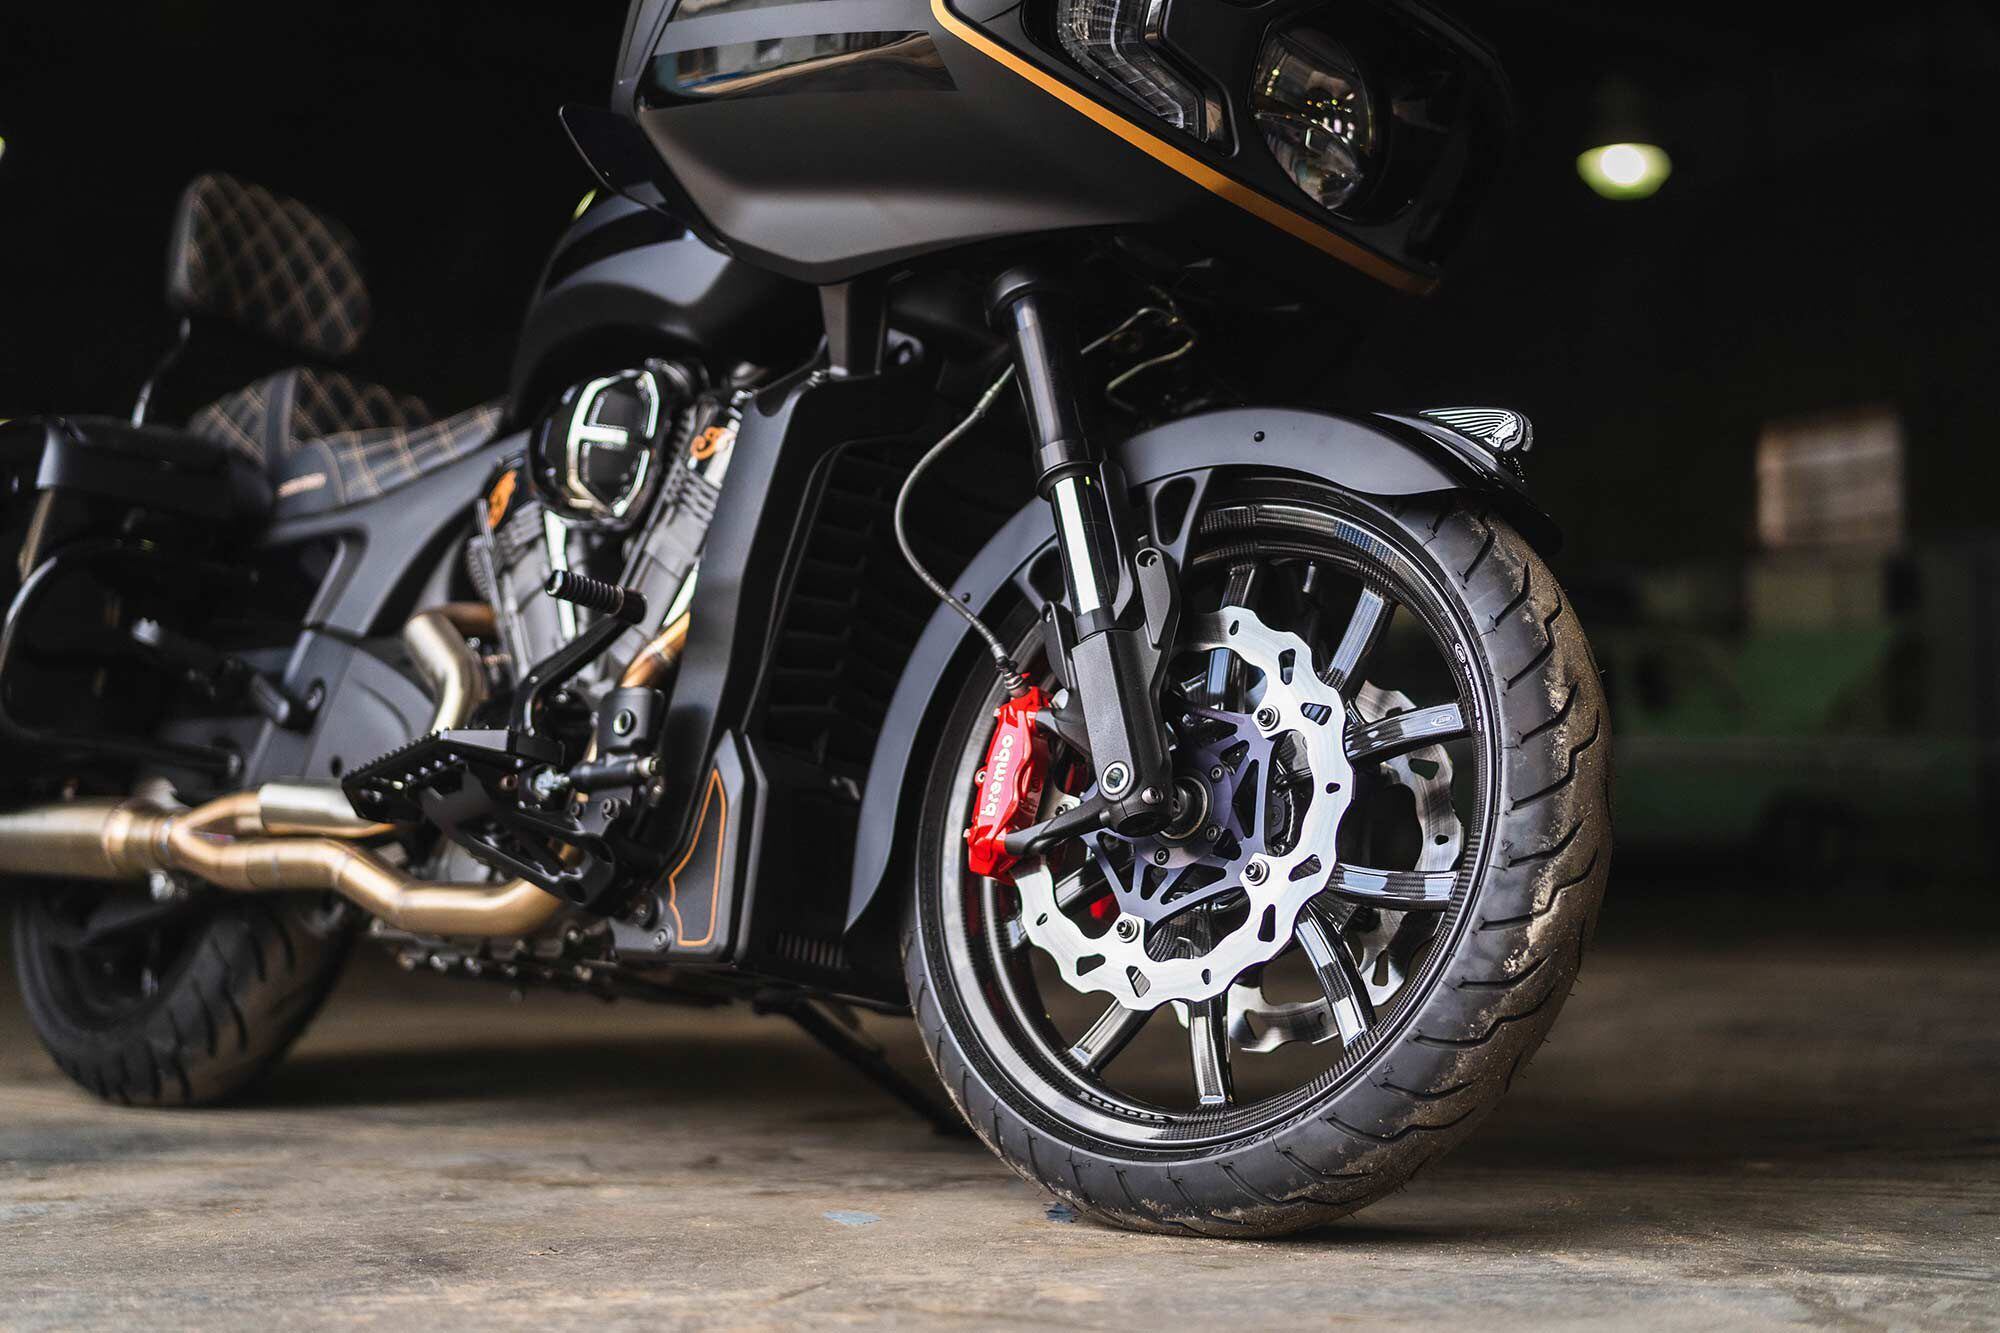 Galfer wave rotors, Brembo brake calipers, and carbon fiber wheels all fit the high-performance aesthetic of the build while enhancing the bike’s overall performance.